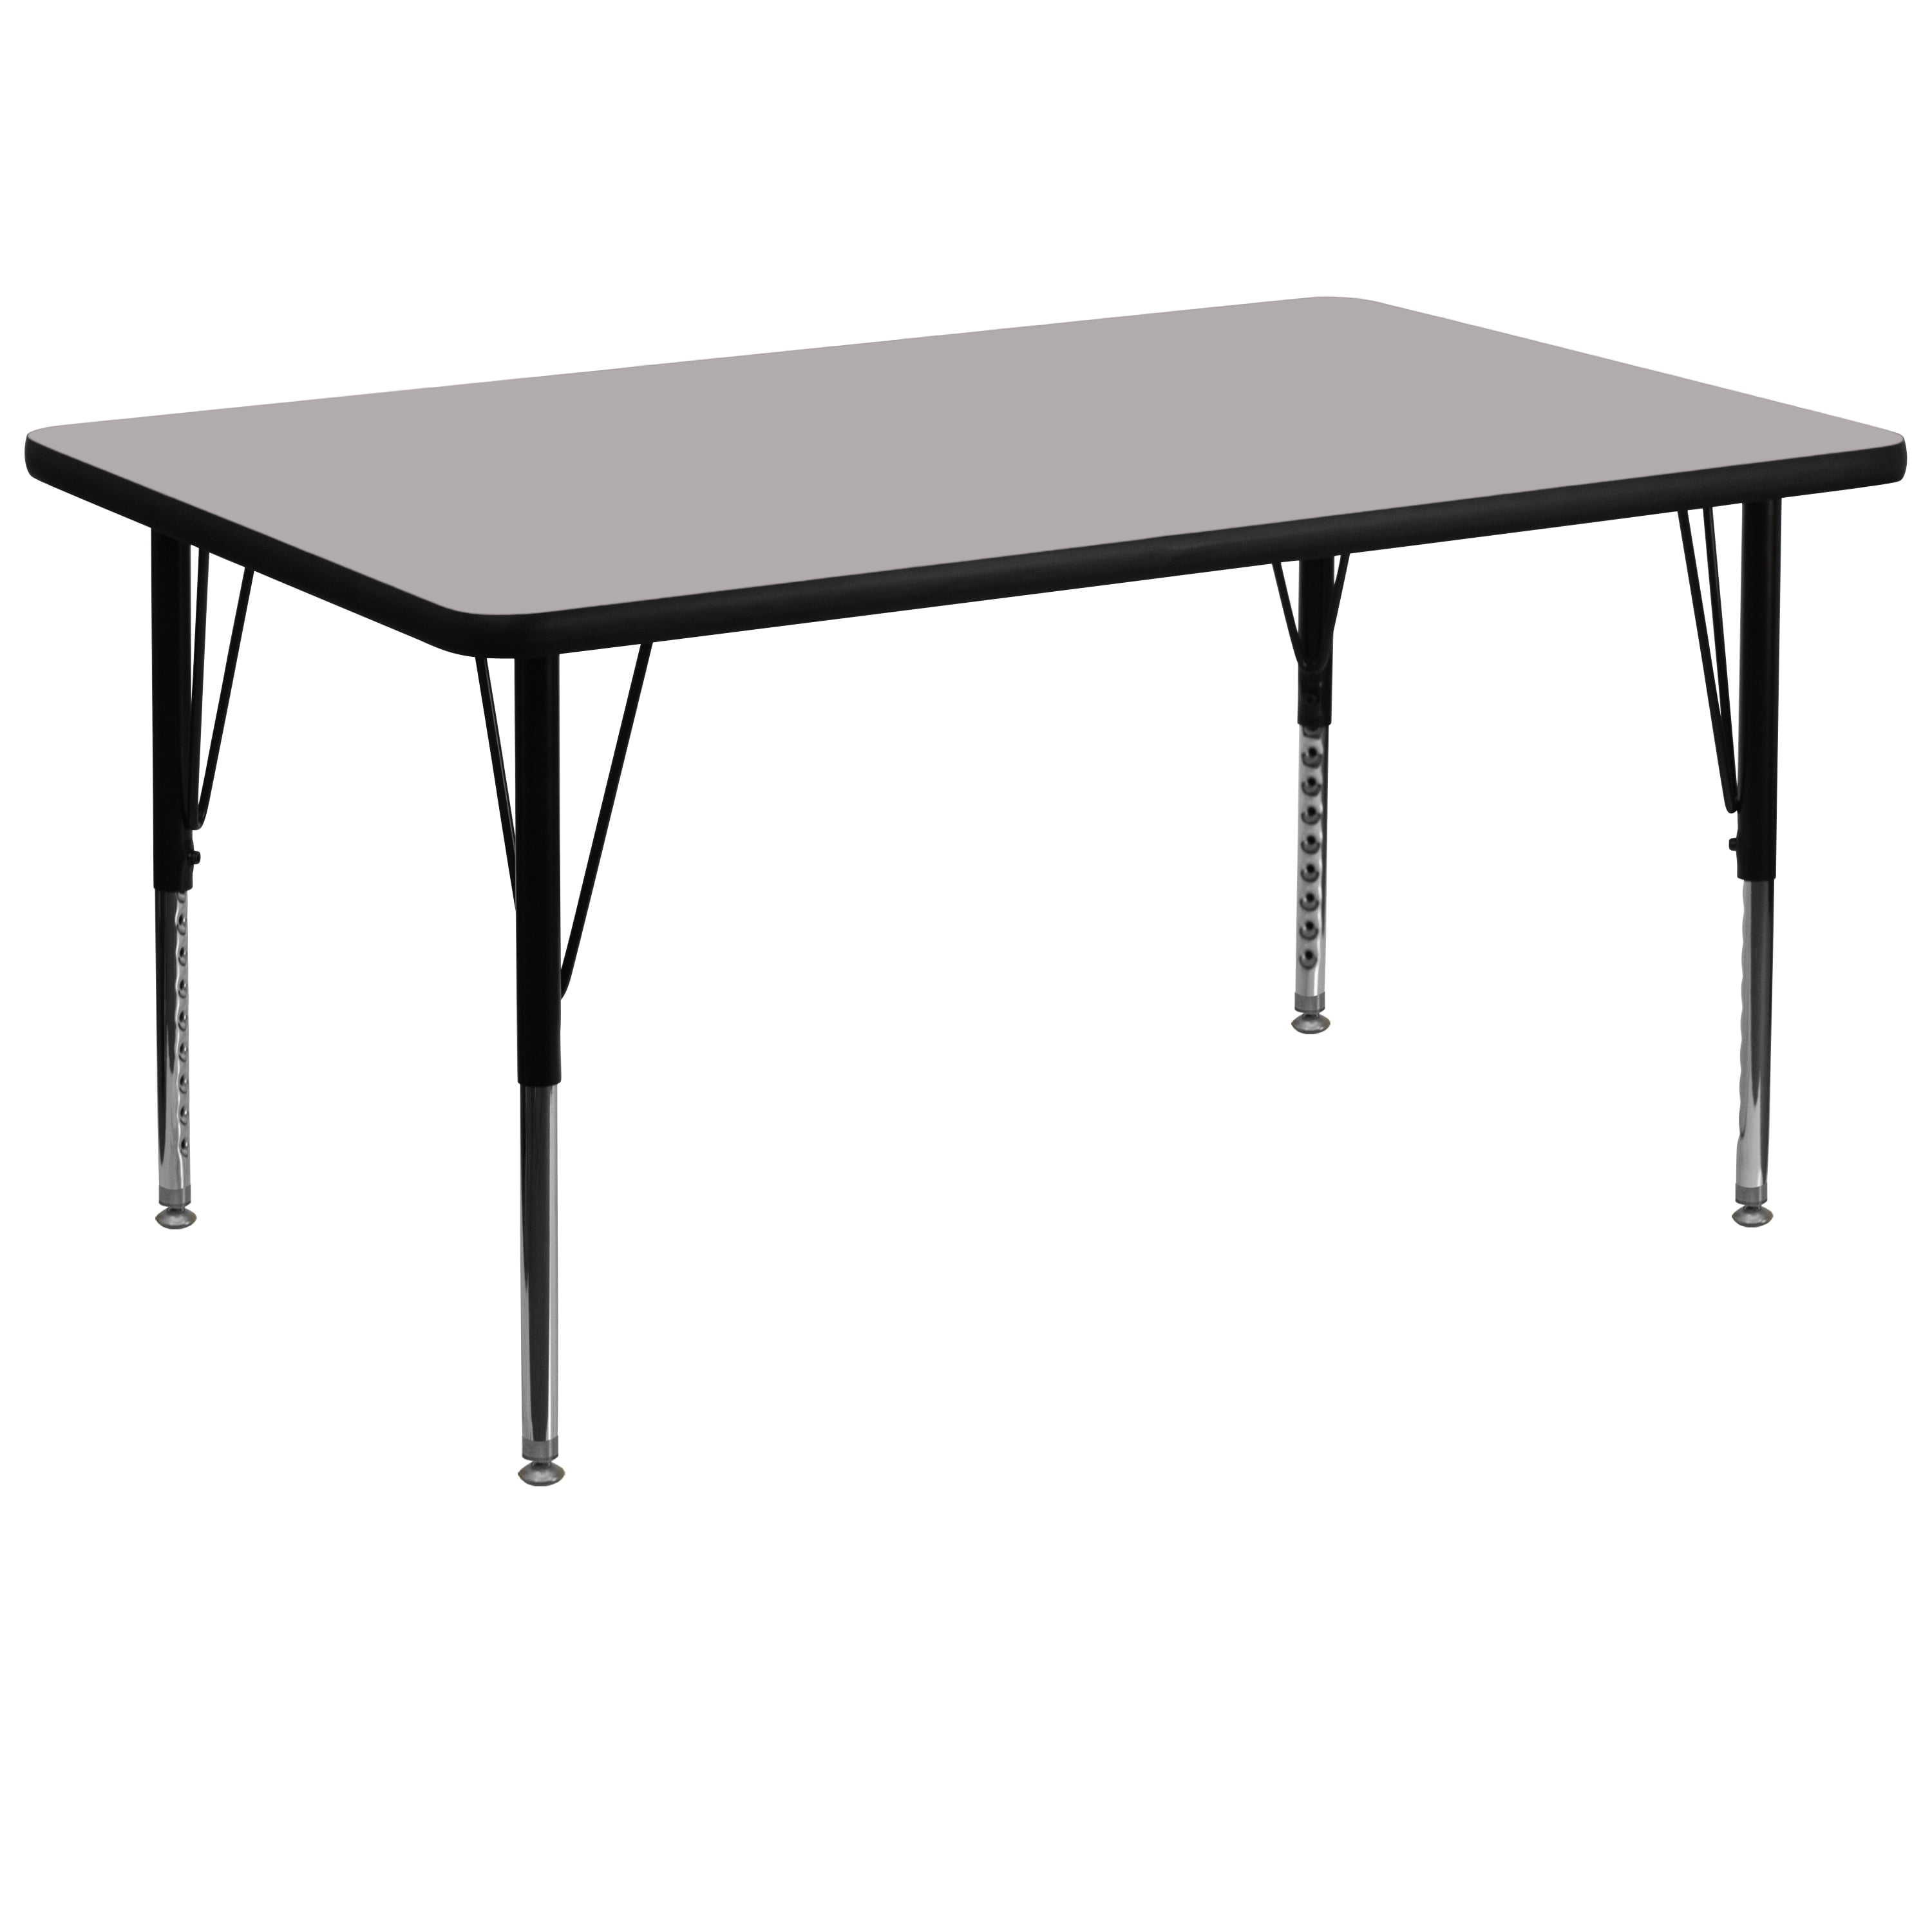 Edge Color: Bright Blue Creative Colors 24 x 48 Rectangle Activity Table with Top Color: Gray Nebula Leg Height: Standard 21-30 Glide Style: Ball